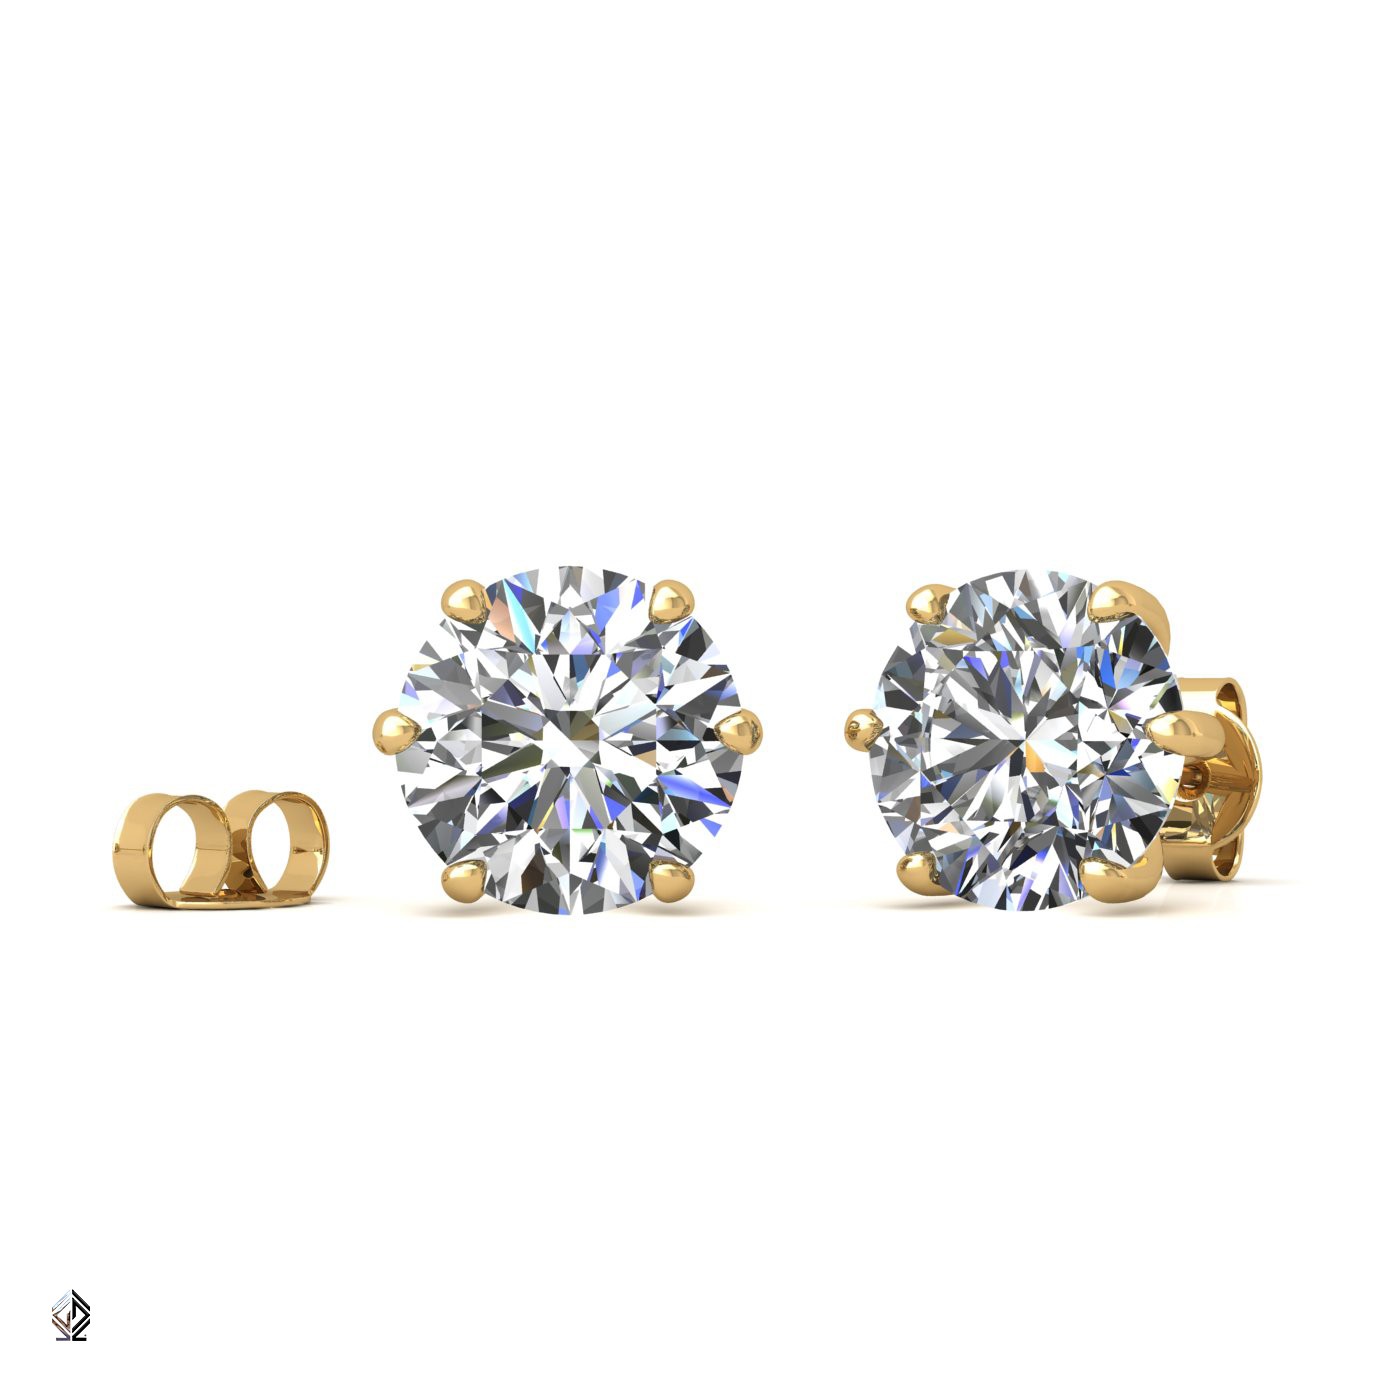 18k yellow gold 0,3 ct each (0,6 tcw) 6 prongs round shape diamond earrings Photos & images